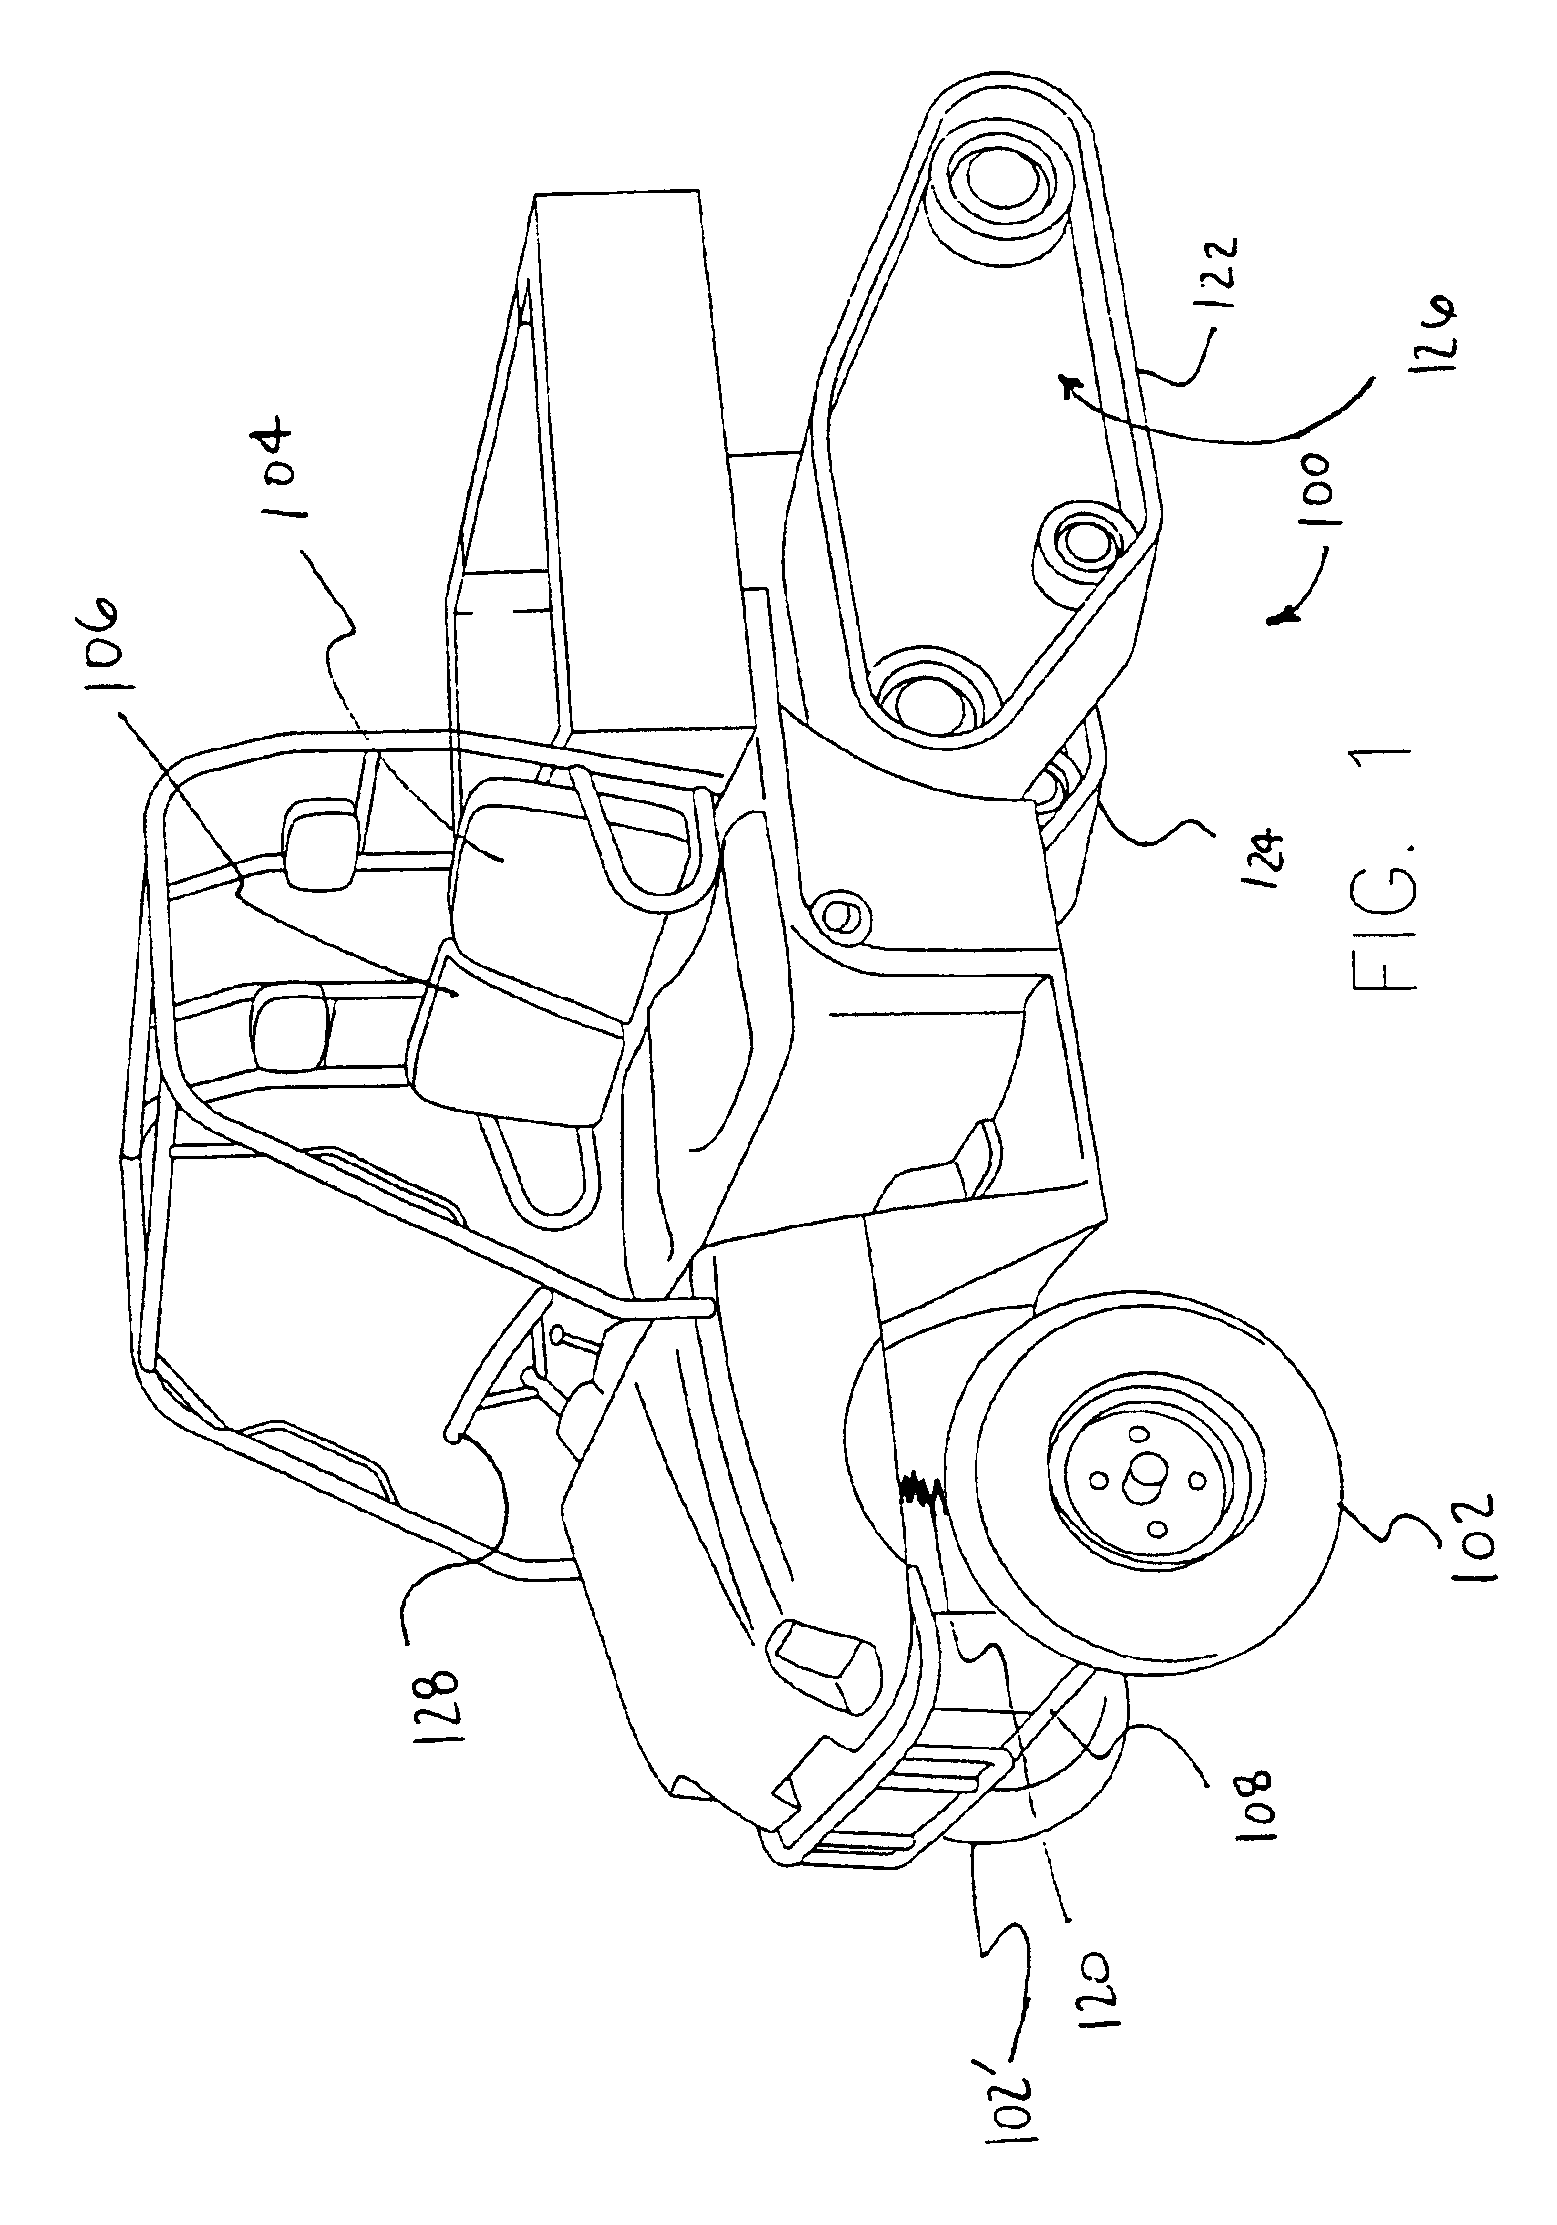 Suspension for a tracked vehicle